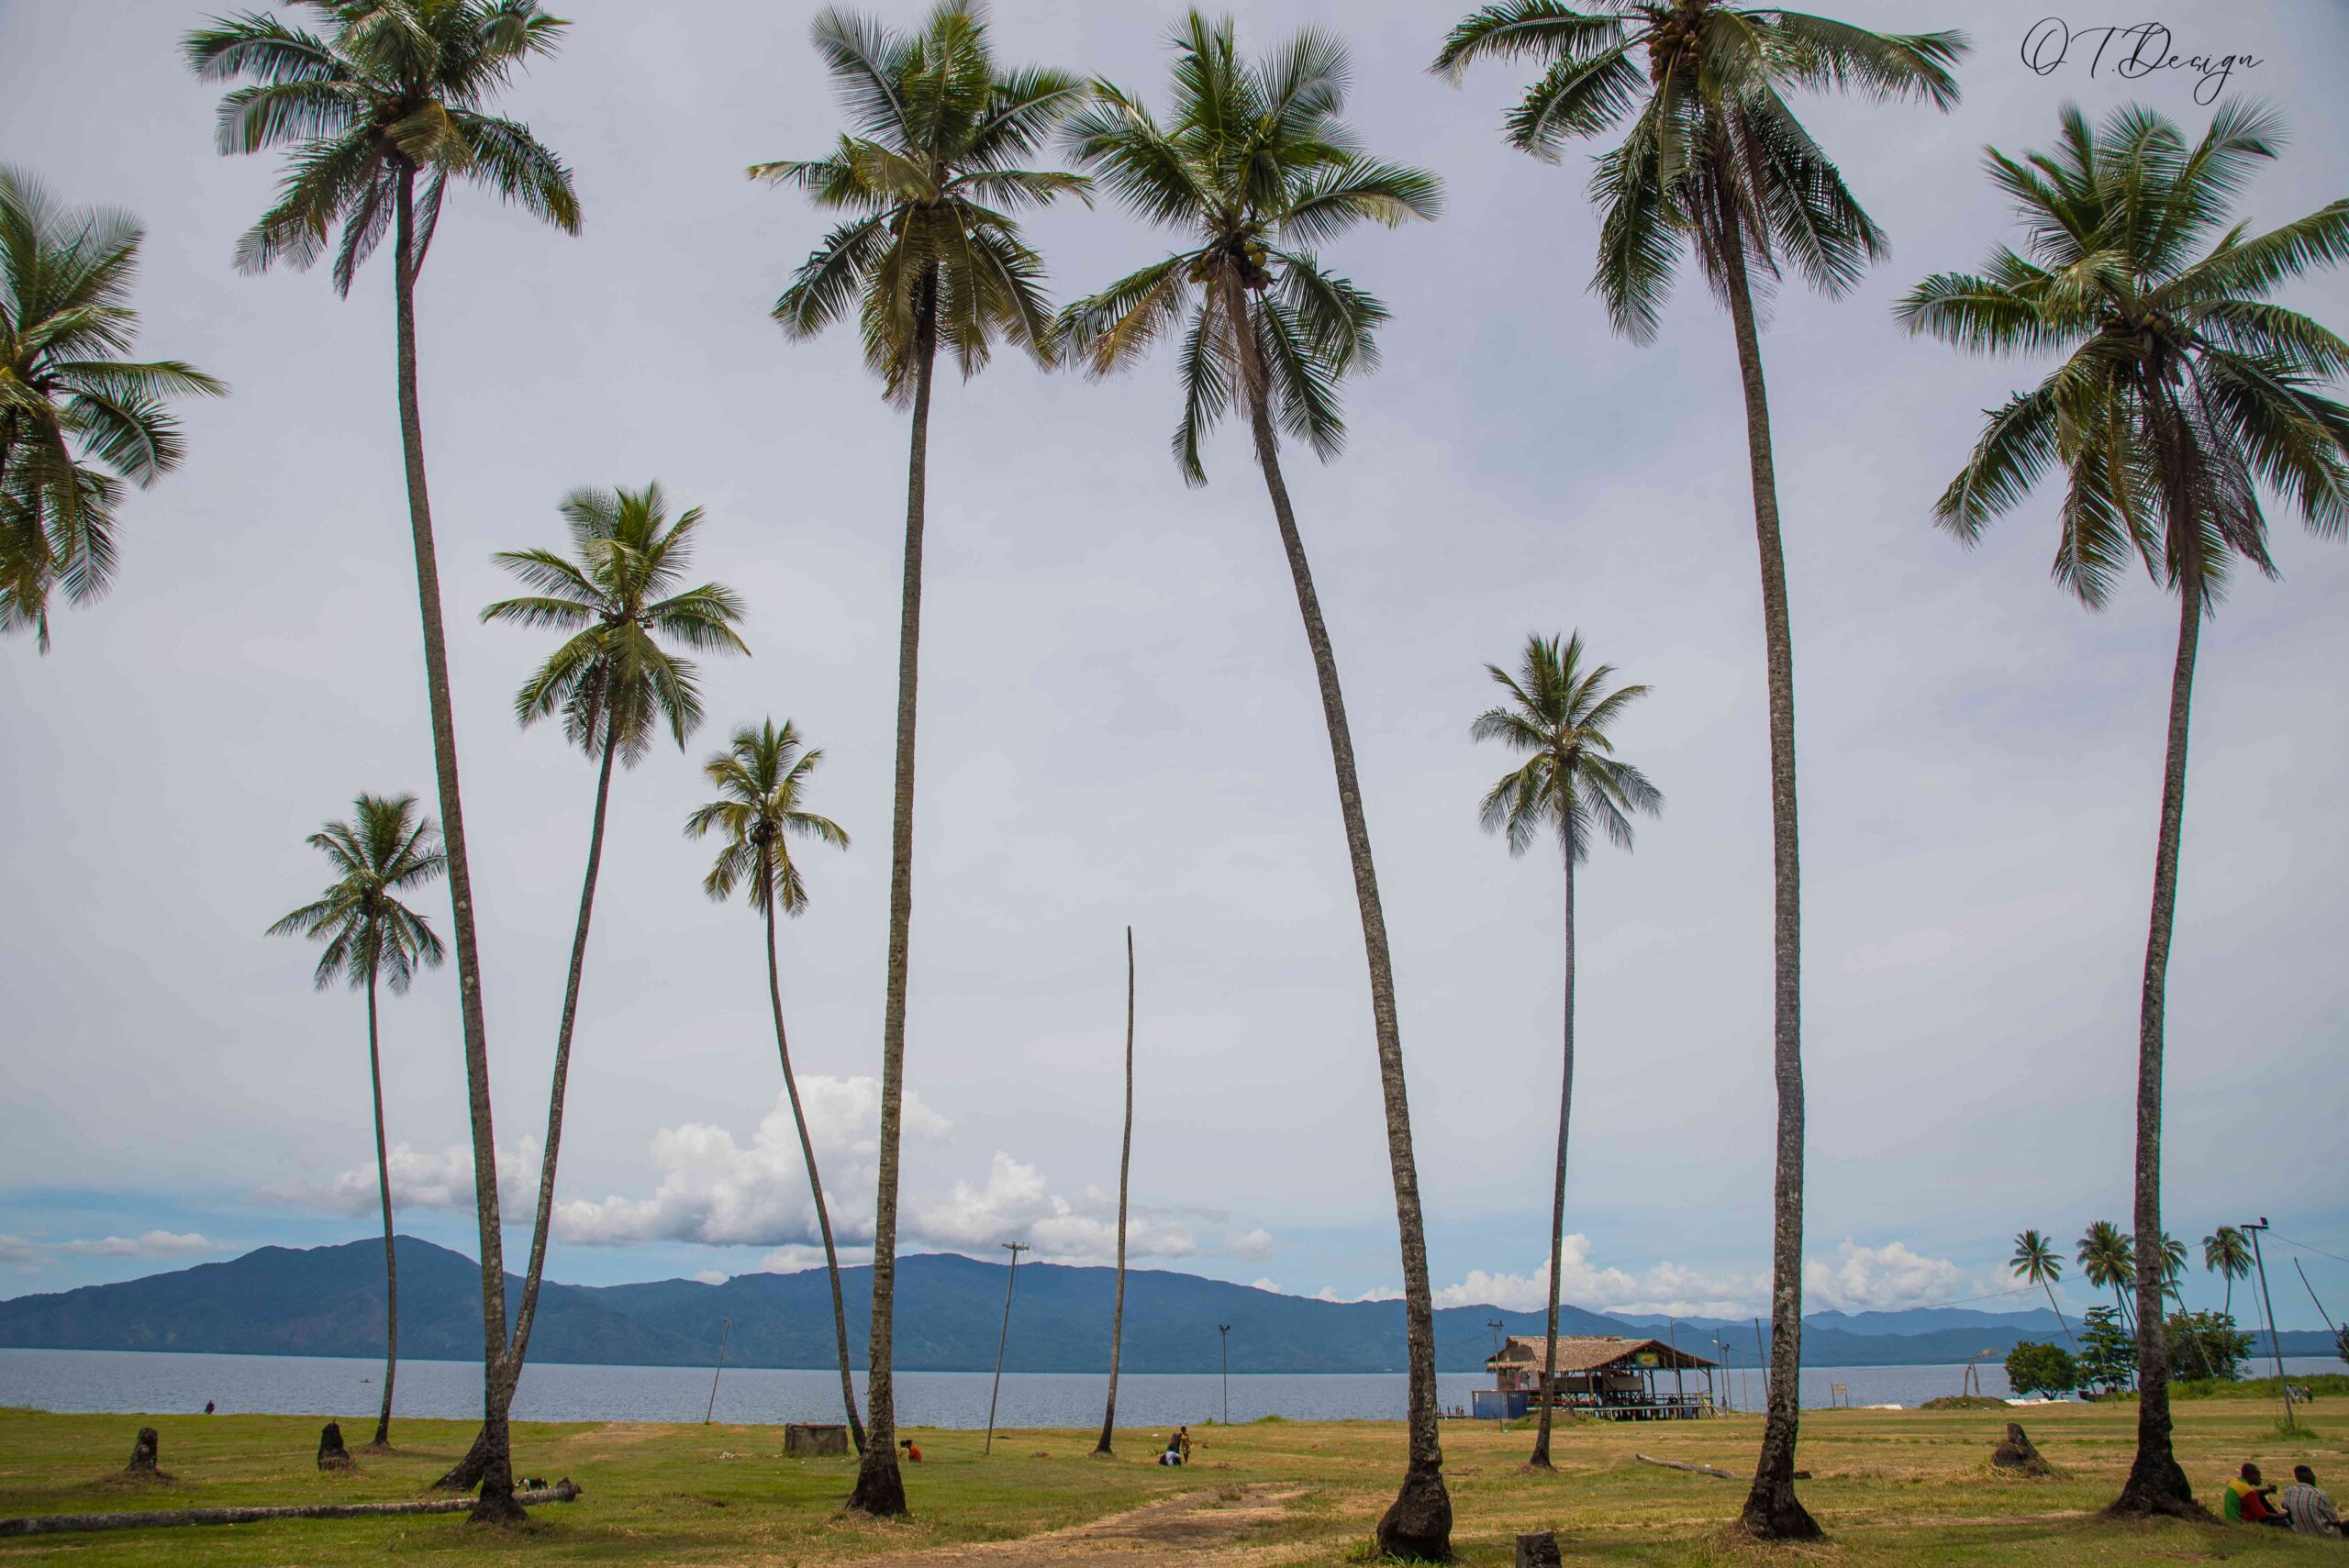 Big palm trees and a green yard in front of the sea in Alotau, Papua New Guinea